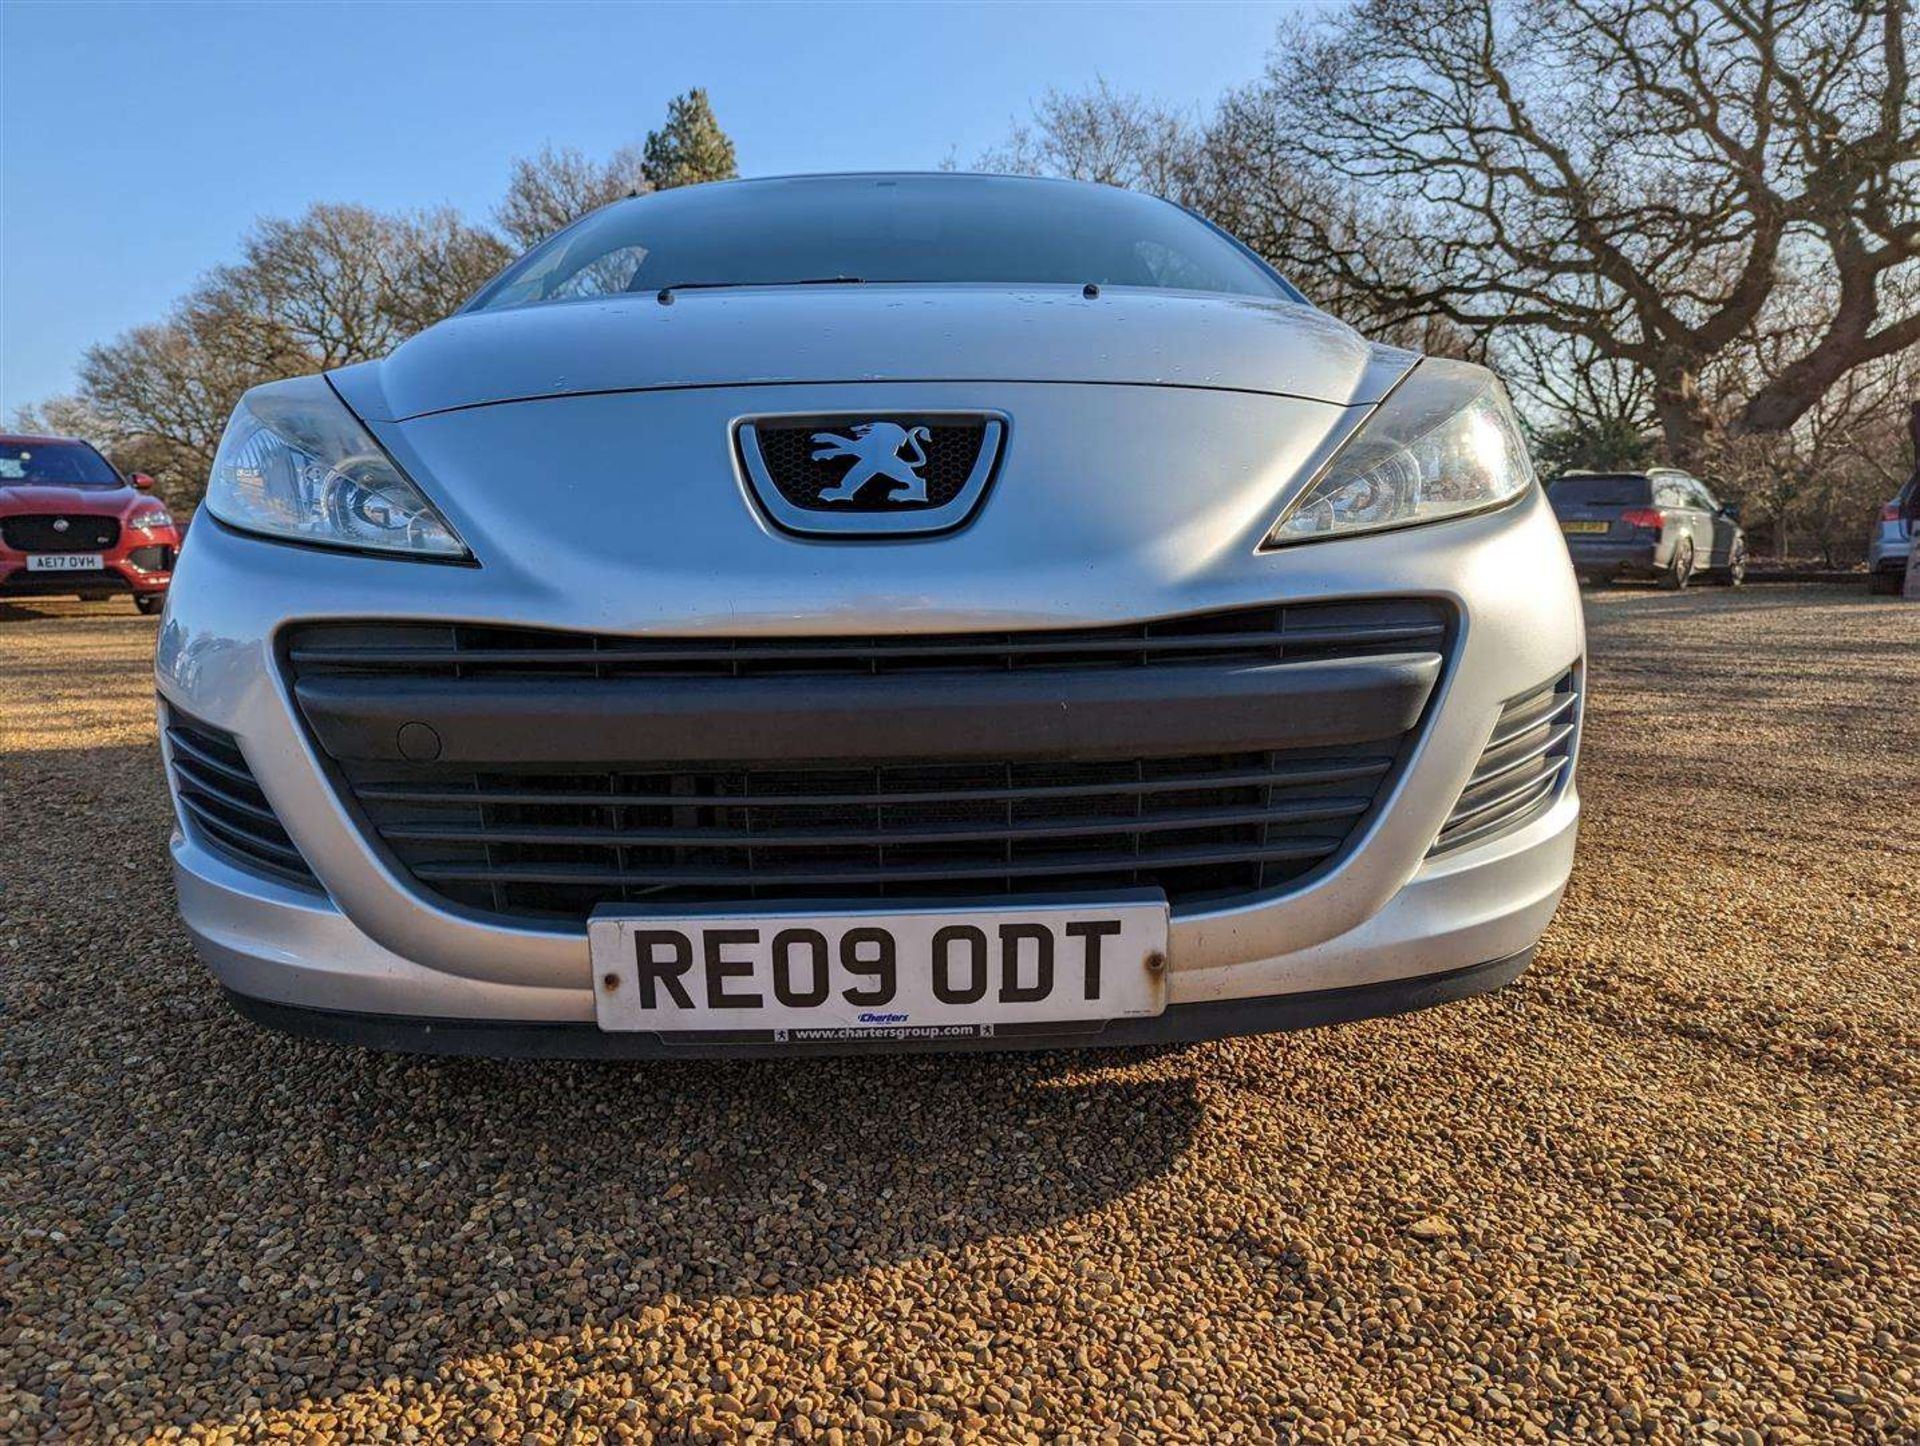 2009 PEUGEOT 207 S SW HDI - Image 26 of 26